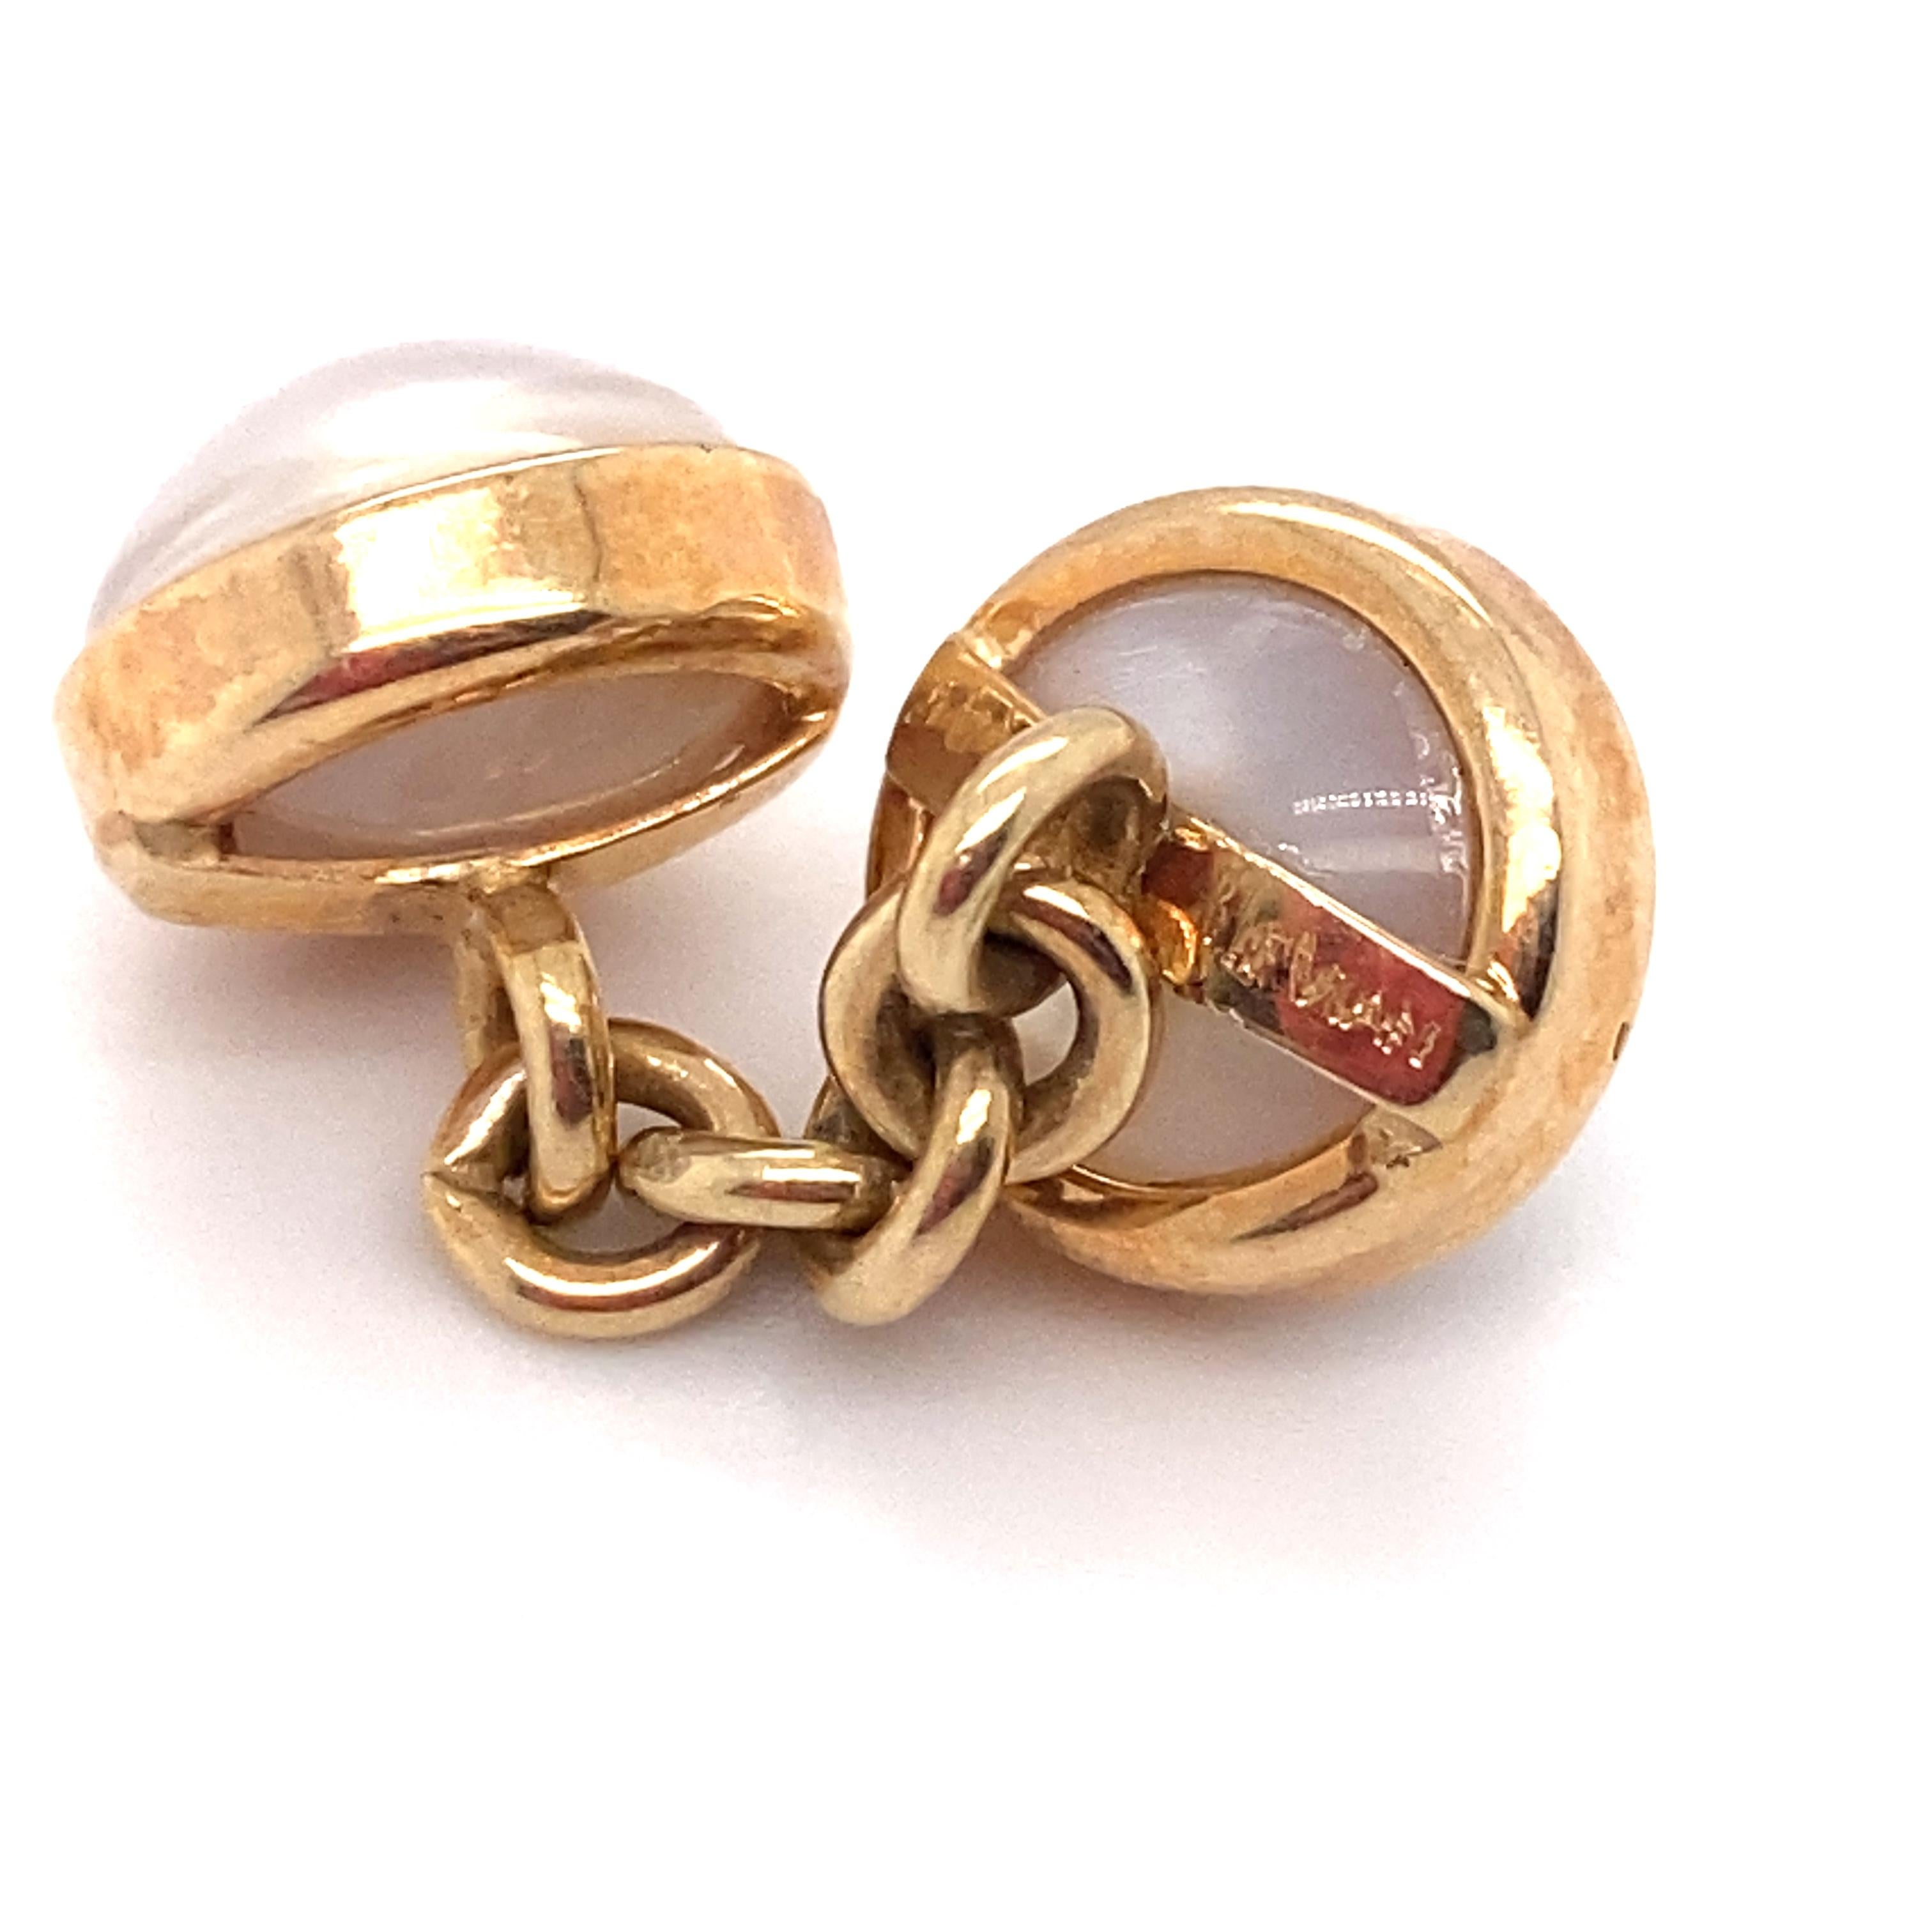 Le Vian Mabe Pearl Chain Cuff Links in 14K Gold In Good Condition For Sale In Addison, TX